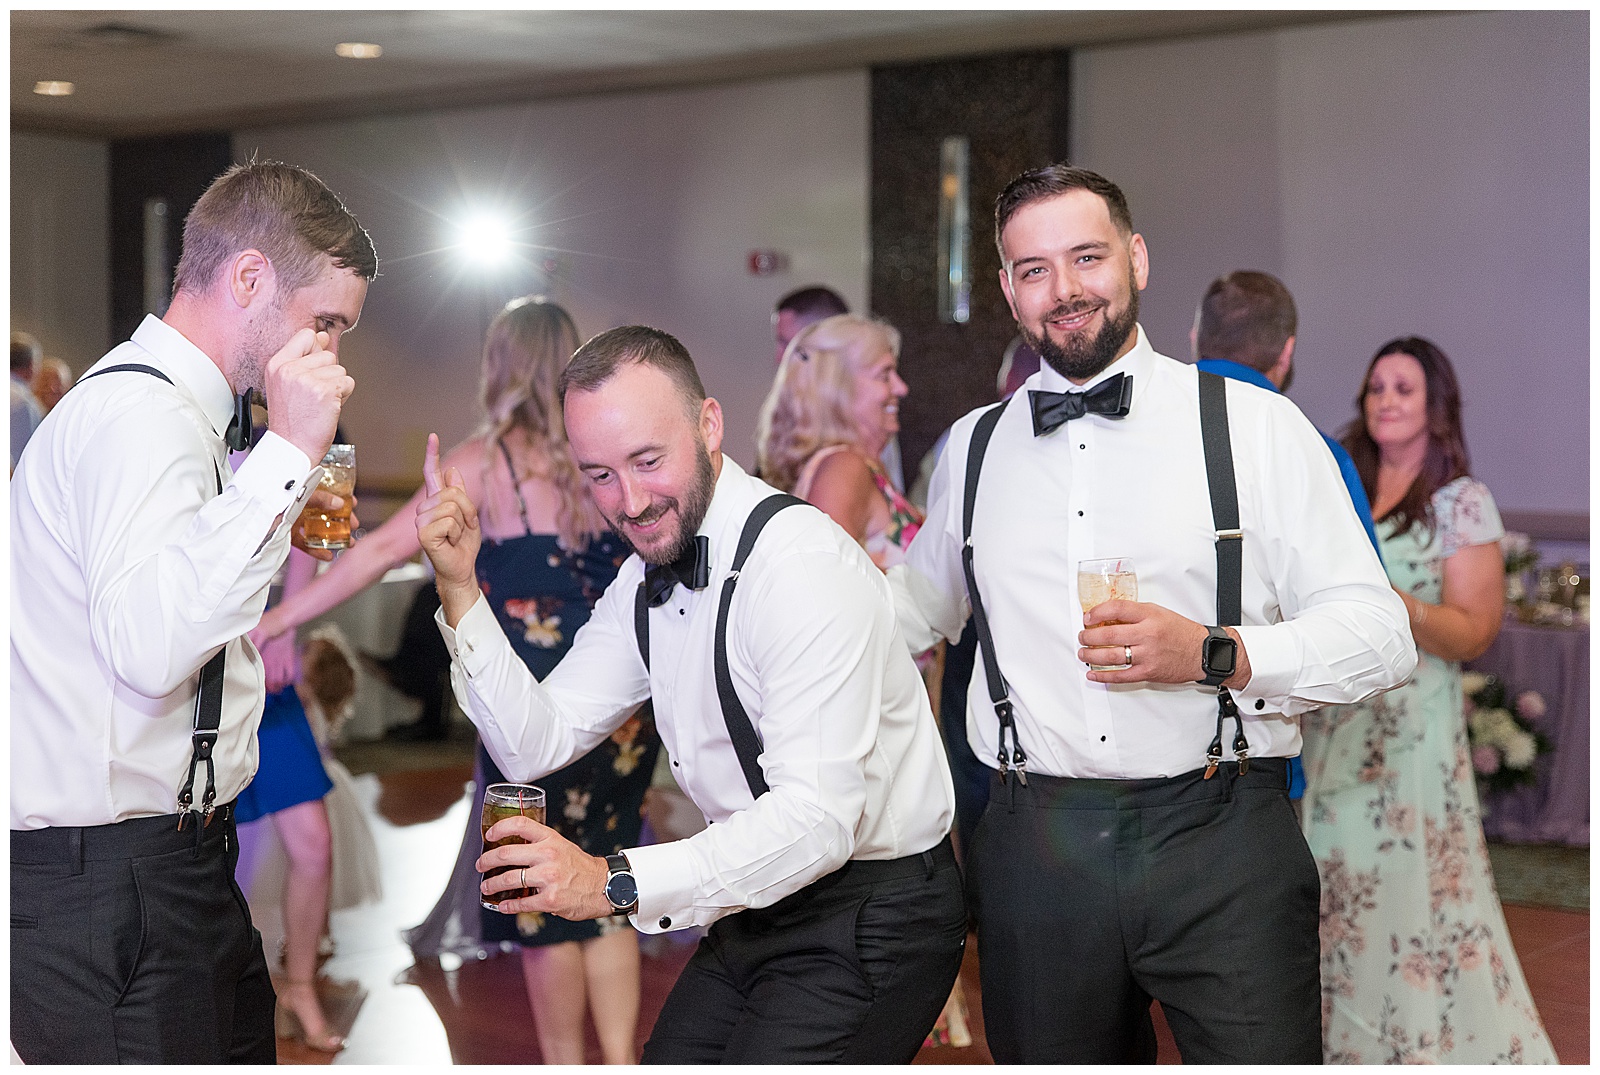 groom and his groomsmen dancing and holding drinks during wedding reception as they all wear white dress shirts and black pants with suspenders